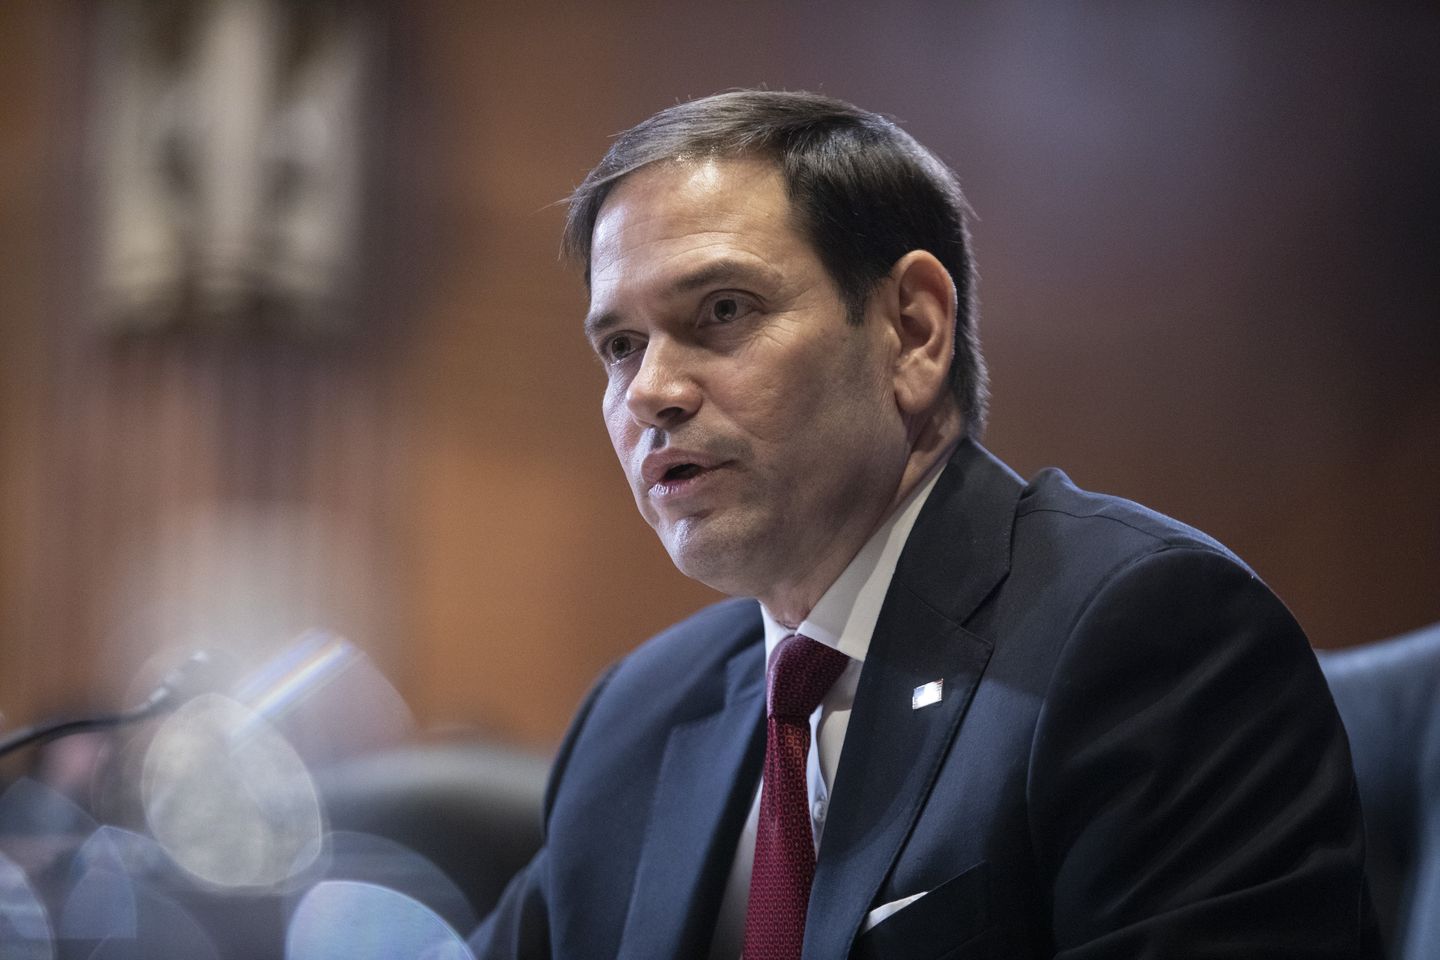 Marco Rubio demands assurance that federal sick leave won't cover travel time for abortion